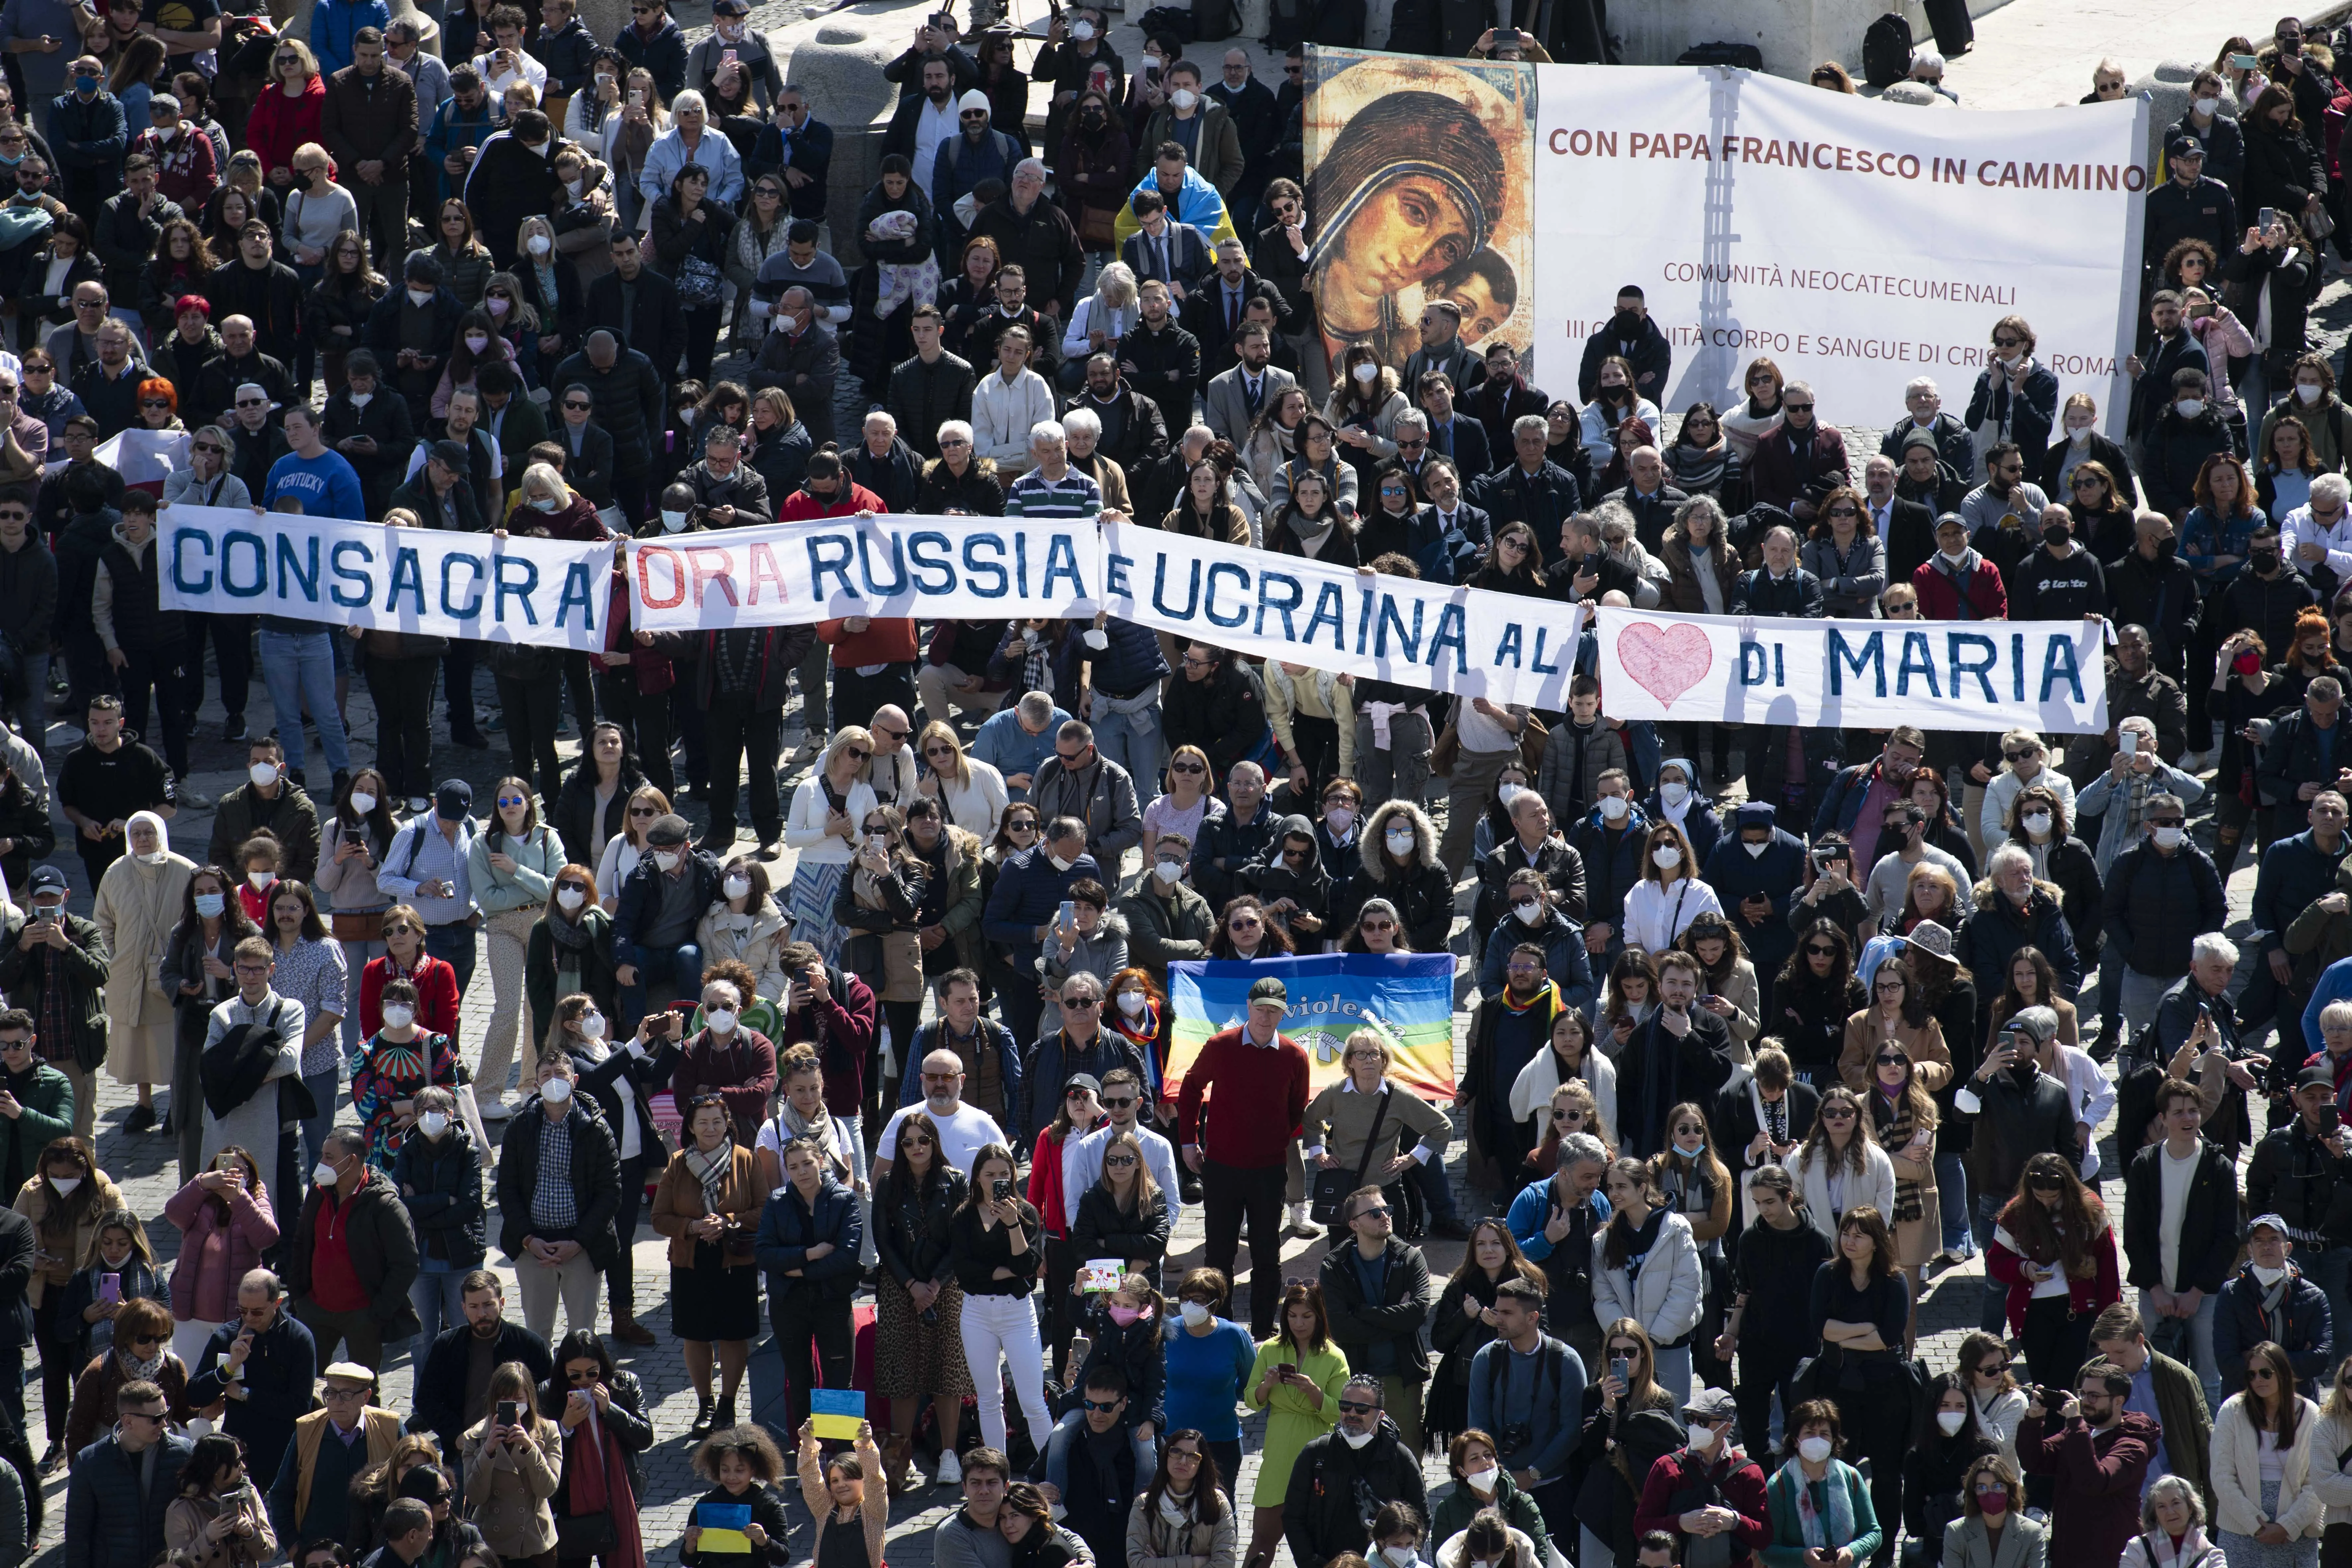 Banner calling for the consecration of Russia is displayed during Pope Francis' Angelus in St. Peter's Square on March 13, 2022.?w=200&h=150